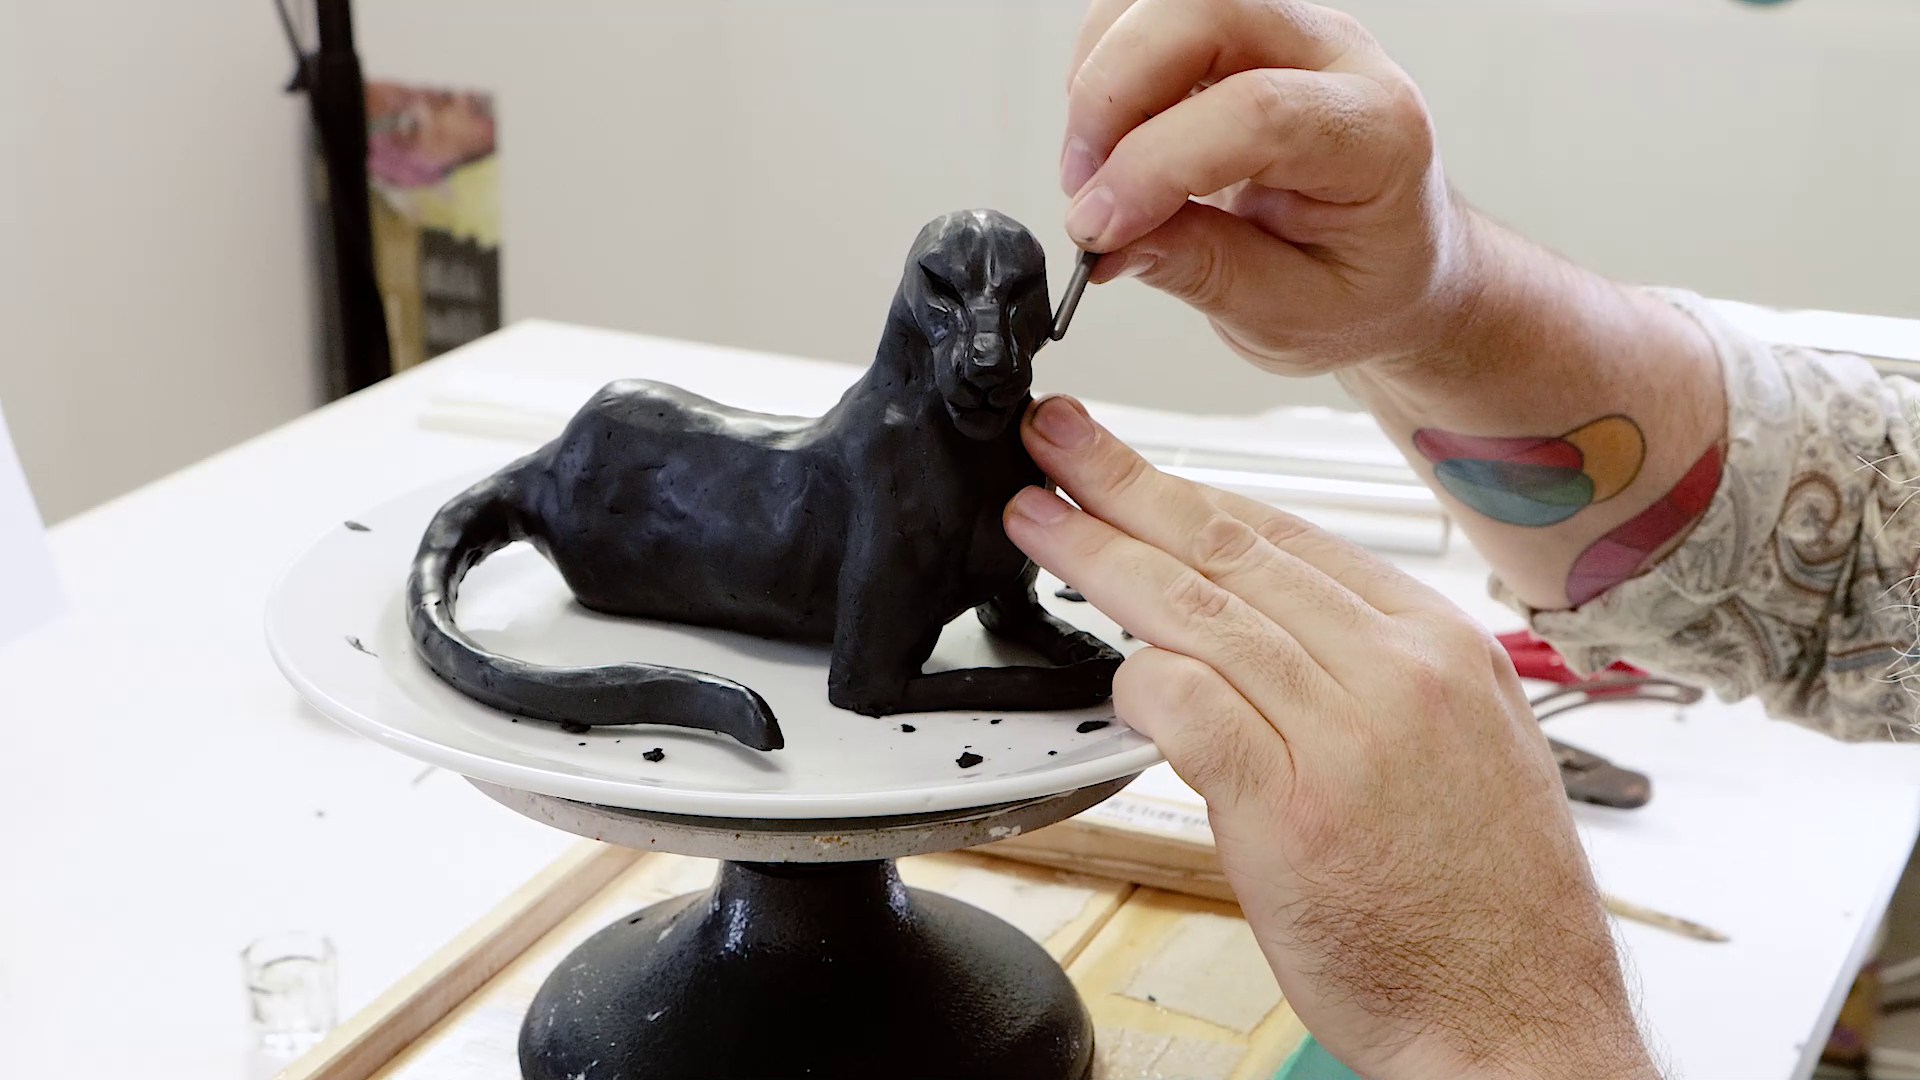 Sculpting the face of the jaguar with modelling tools